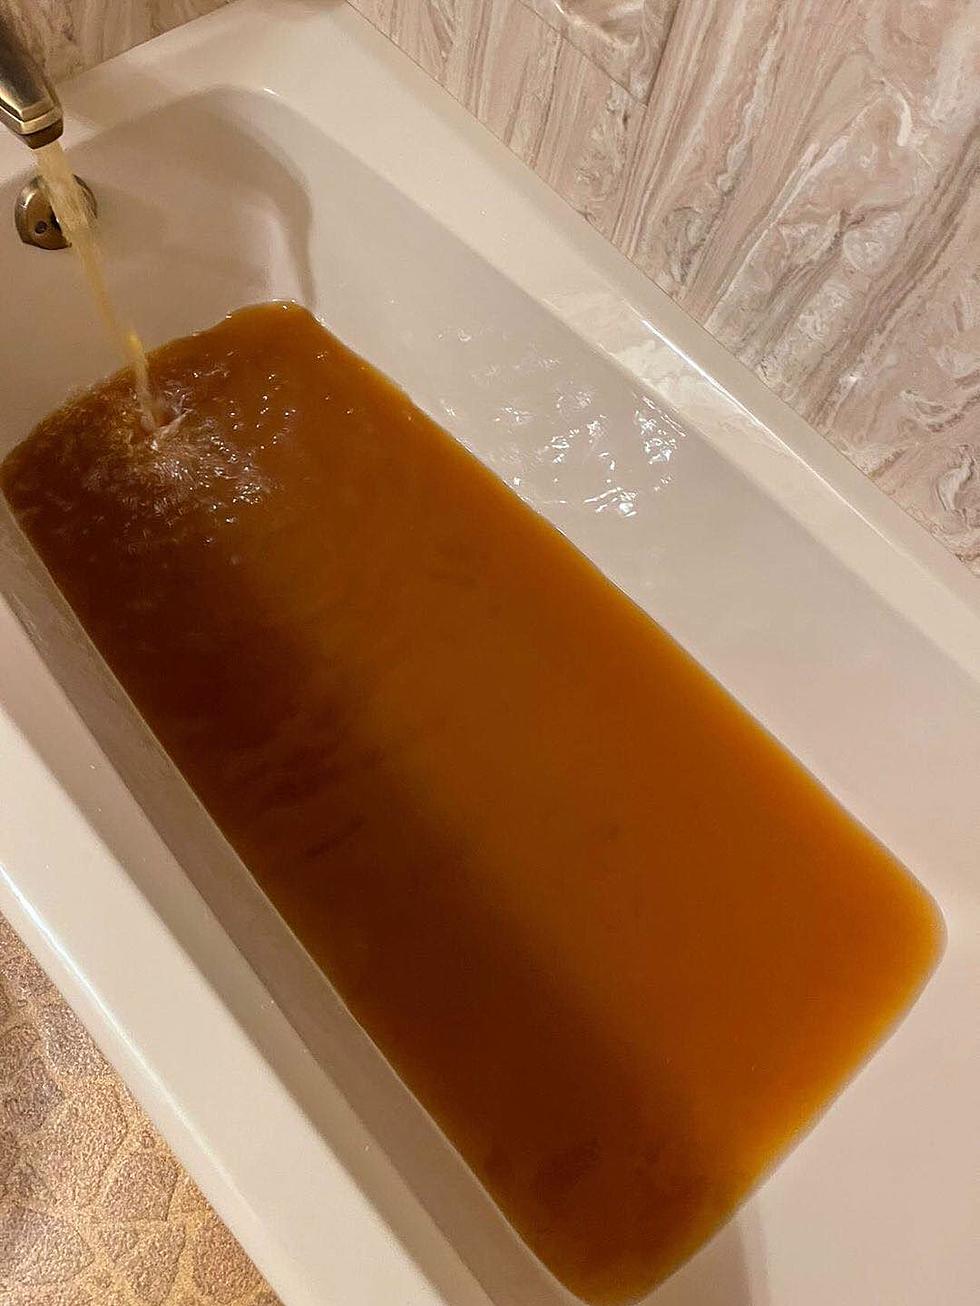 Sunset Residents Express Concerns Over Alleged Water Conditions